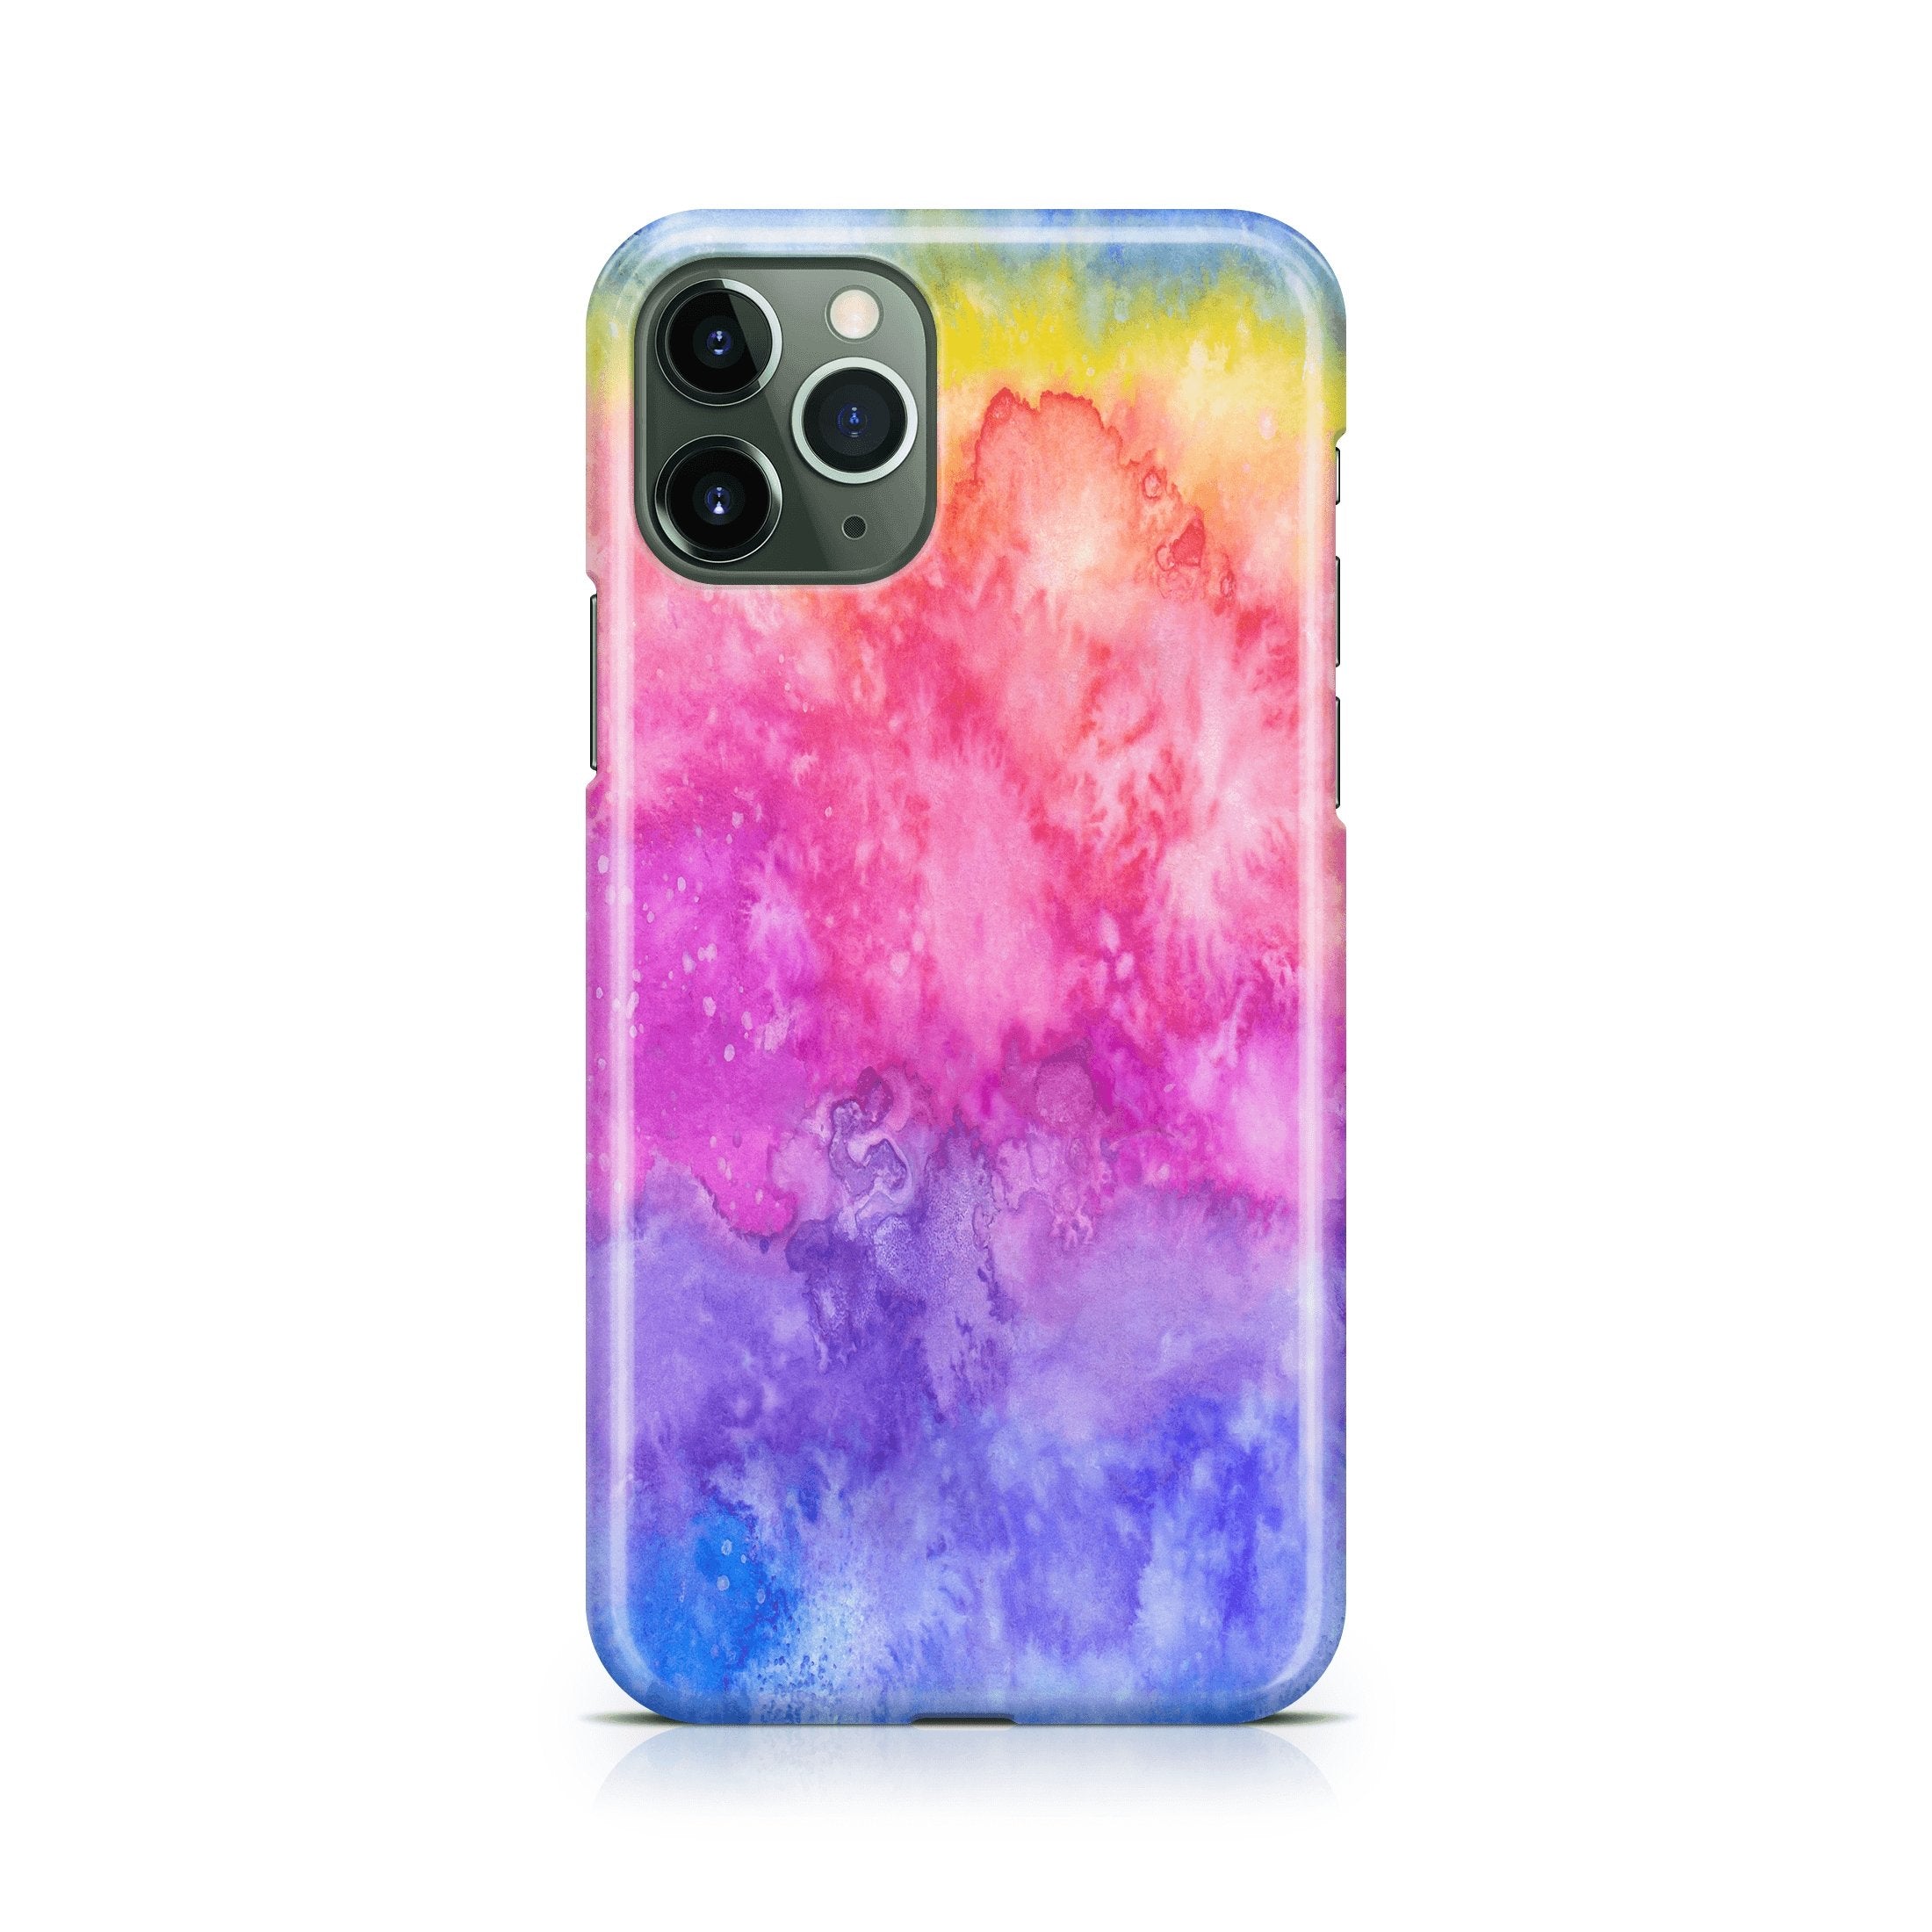 Watercolor Splash - iPhone phone case designs by CaseSwagger